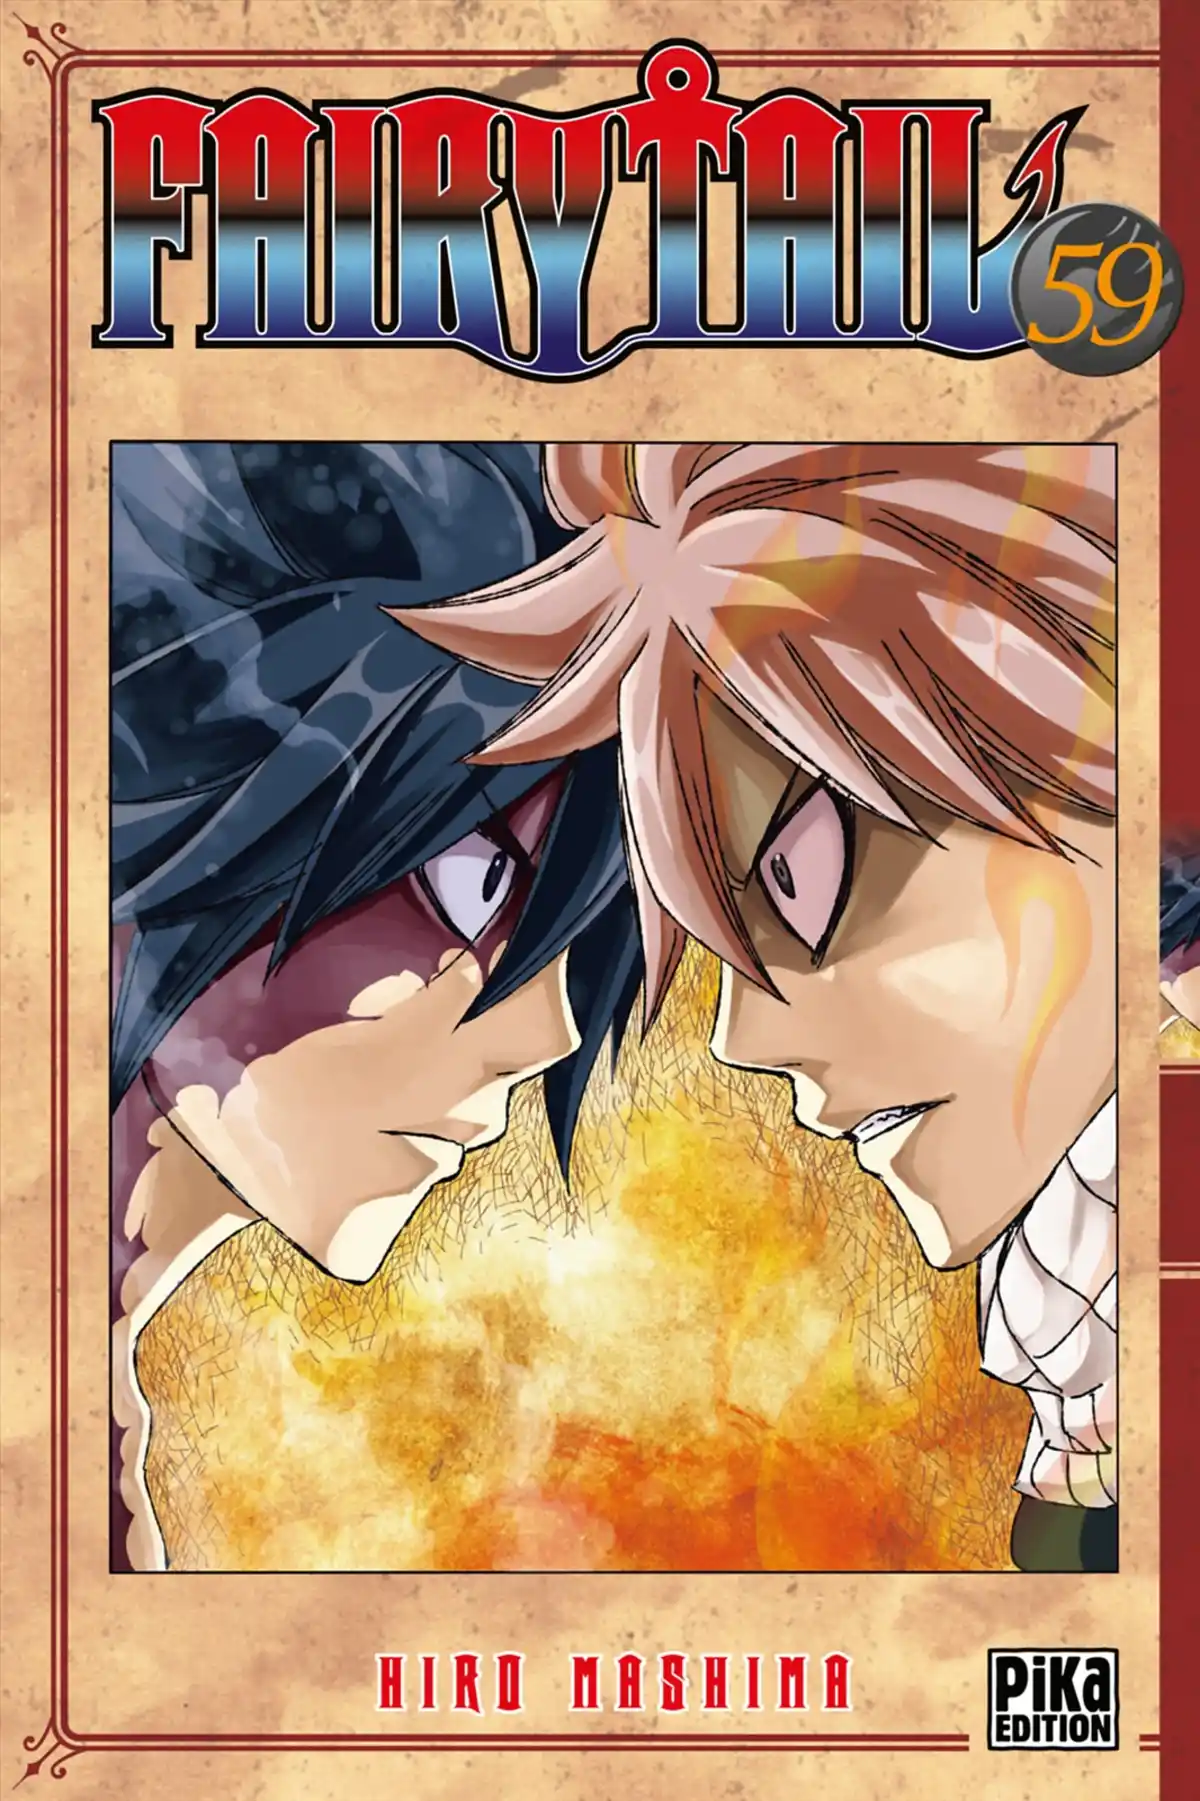 Fairy Tail Volume 59 page 1